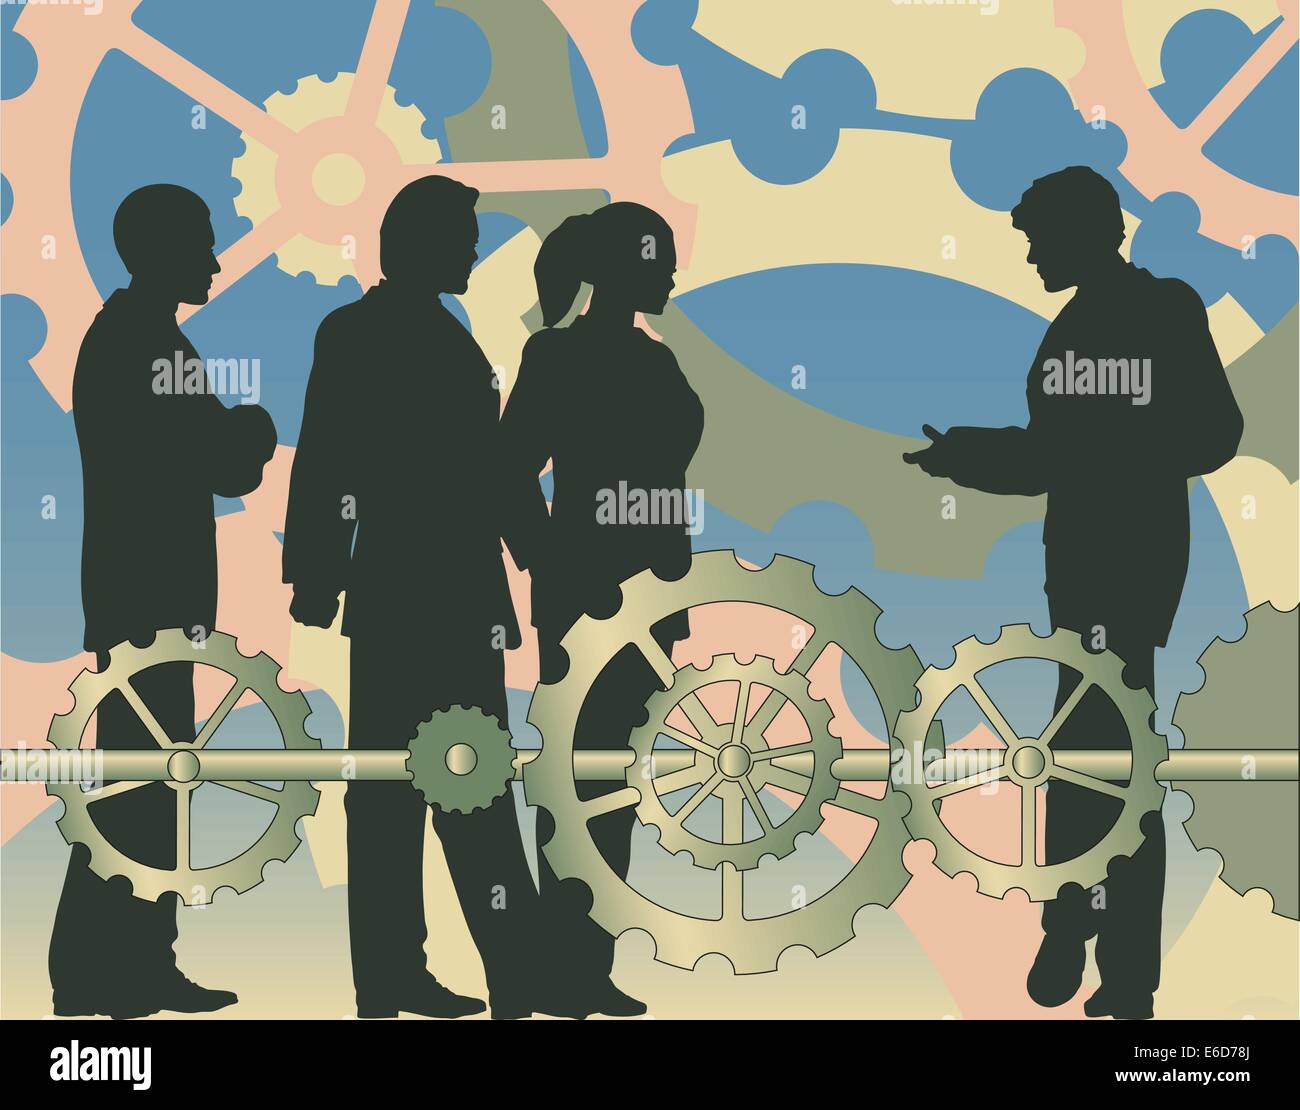 Editable vector illustration of a business group with cogs and wheels Stock Vector